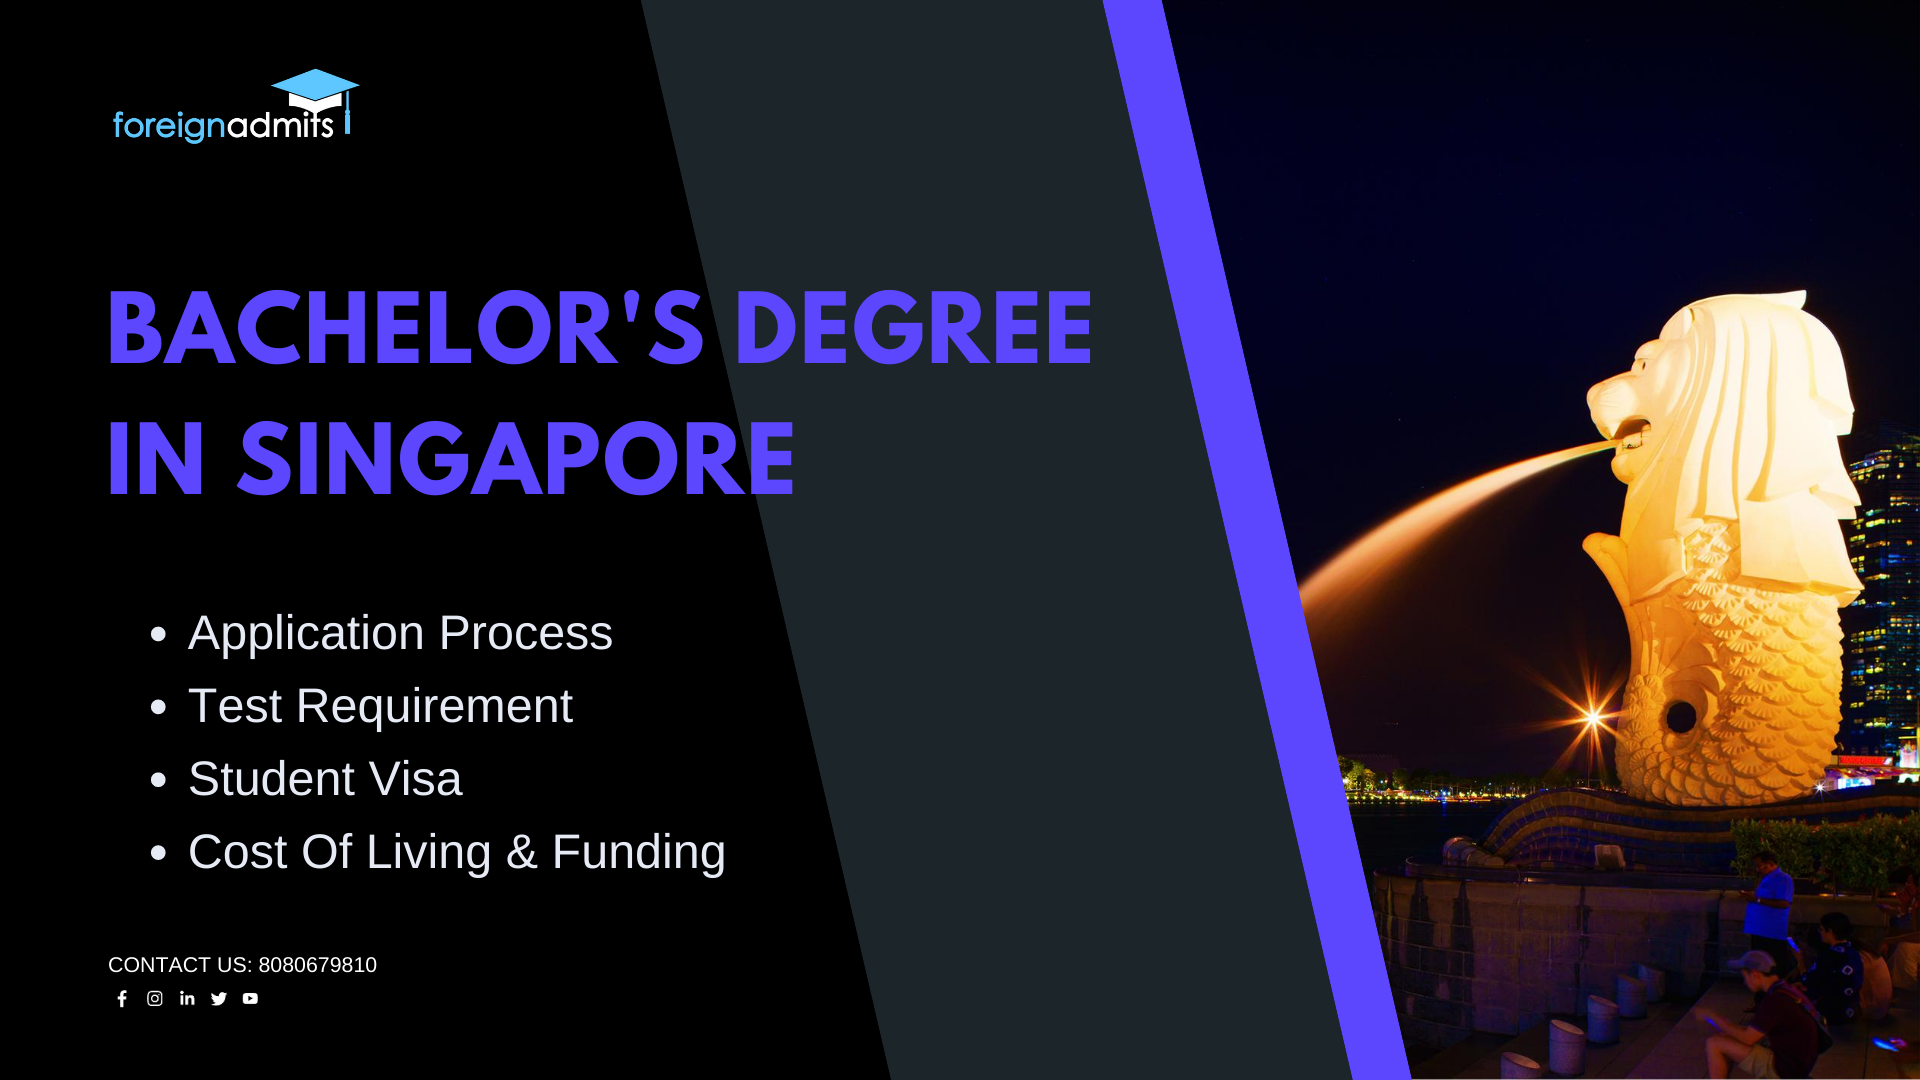 Bachelors degree in Singapore